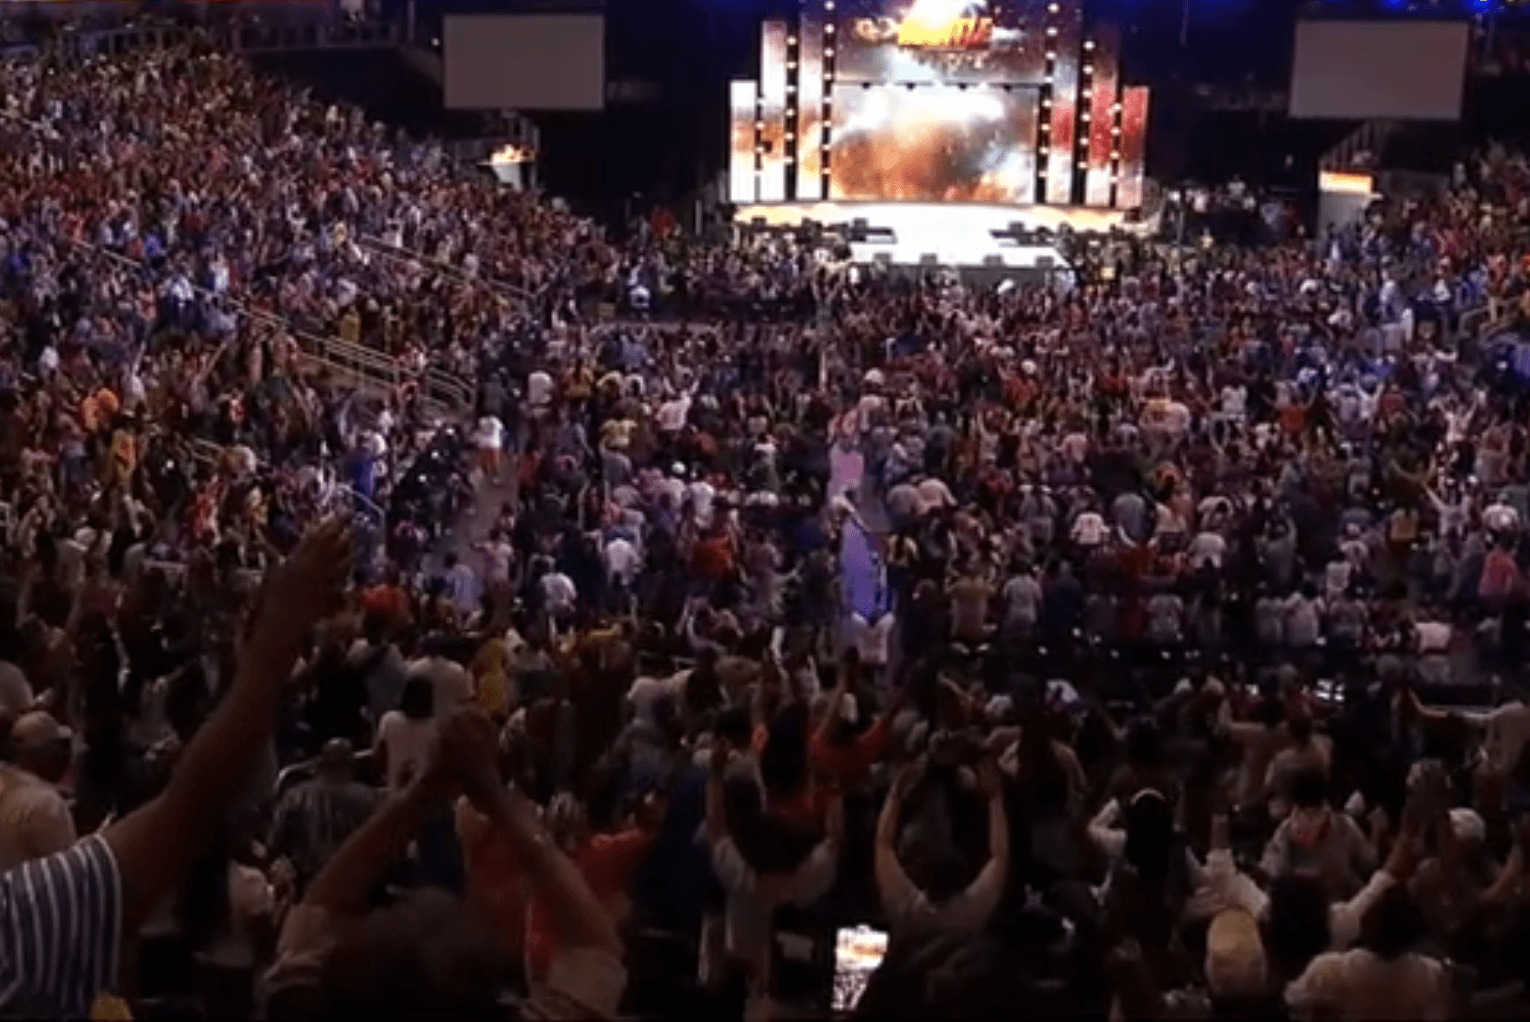 MIRACLE: 17,000 Come Together for Mass Deliverance